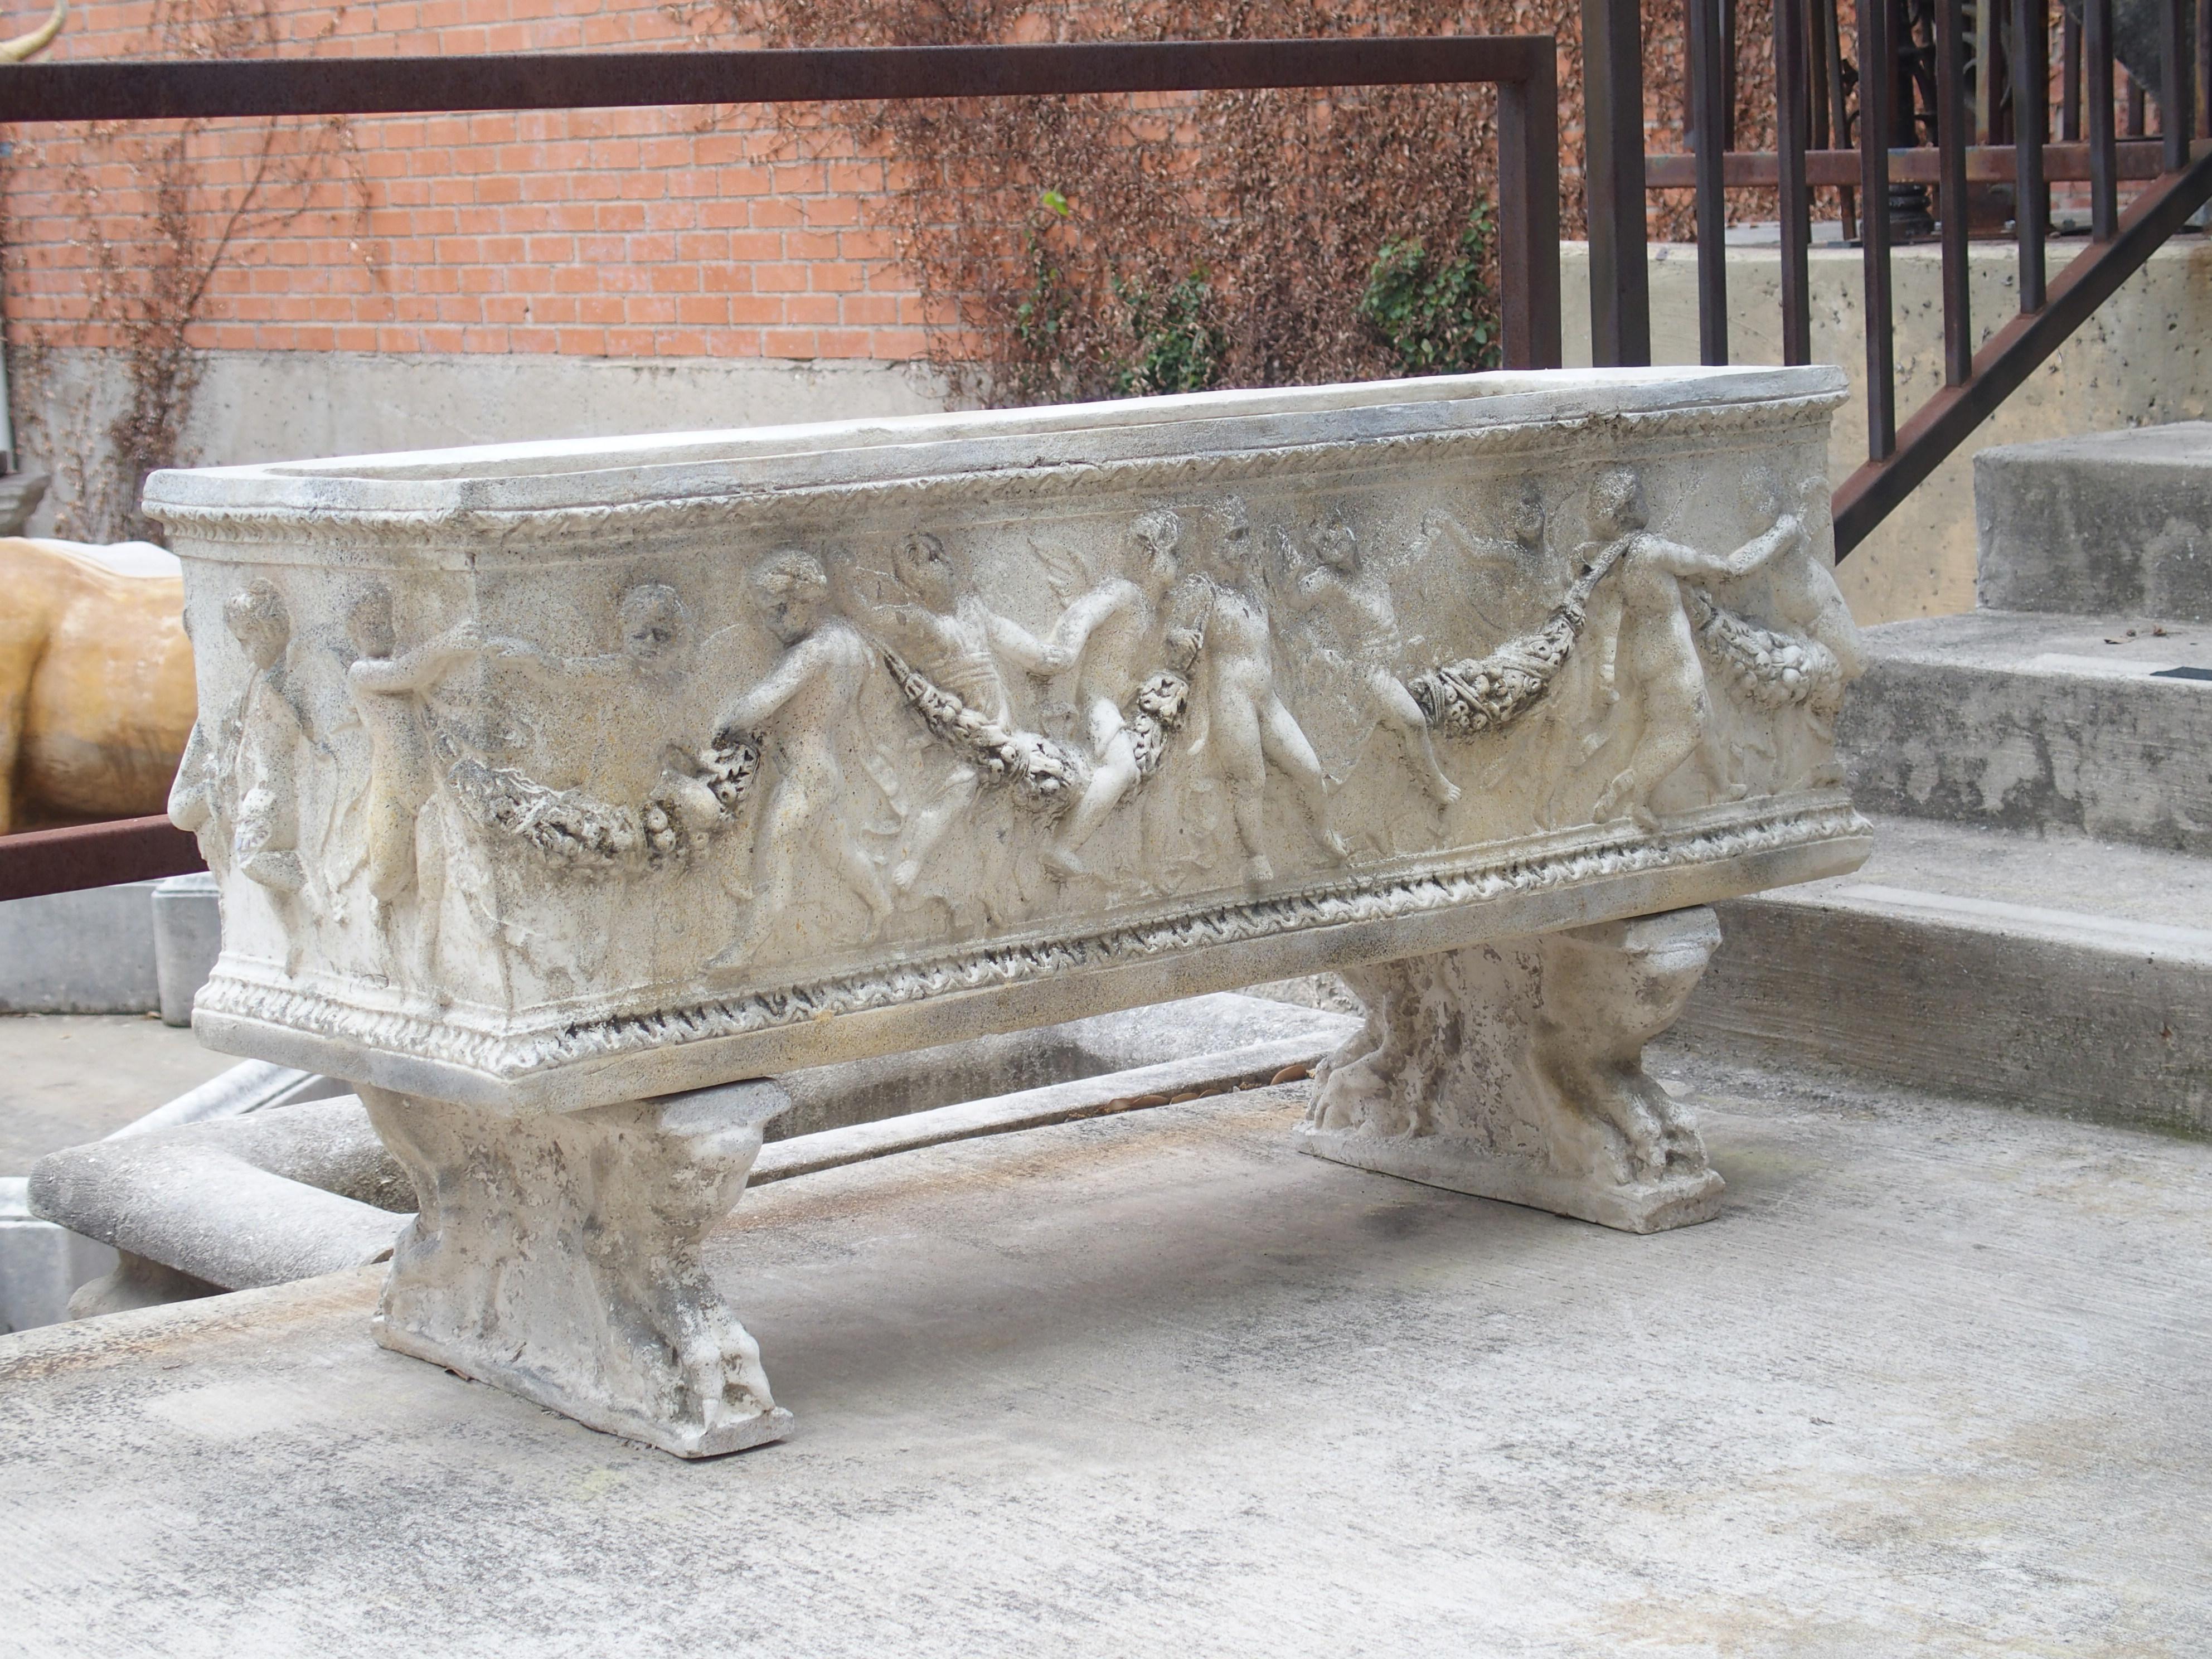 After a 19th century original by Manifattura di Signa, this pair of garden planters or troughs has a Bacchanalian scene set between two layers of foliate embellished moldings. Manifattura di Signa was an Italian workshop that specialized in terra